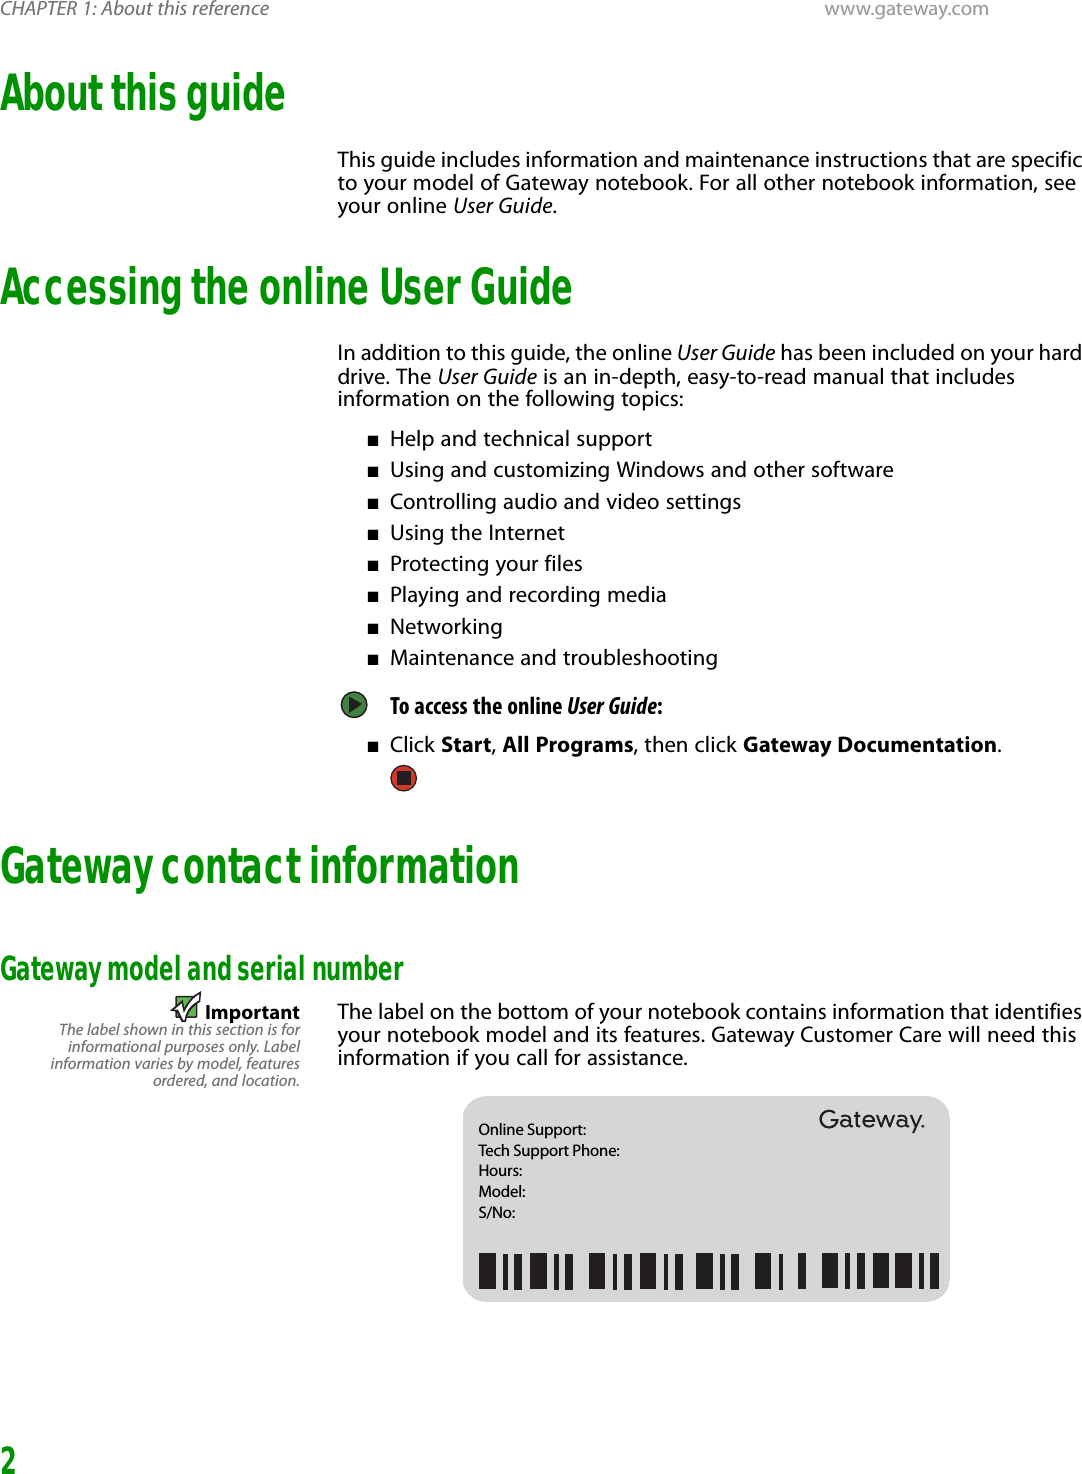 CHAPTER 1: About this reference www.gateway.com2About this guideThis guide includes information and maintenance instructions that are specific to your model of Gateway notebook. For all other notebook information, see your online User Guide.Accessing the online User GuideIn addition to this guide, the online User Guide has been included on your hard drive. The User Guide is an in-depth, easy-to-read manual that includes information on the following topics:■Help and technical support■Using and customizing Windows and other software■Controlling audio and video settings■Using the Internet■Protecting your files■Playing and recording media■Networking■Maintenance and troubleshootingTo access the online User Guide: ■Click Start, All Programs, then click Gateway Documentation.Gateway contact informationGateway model and serial numberImportantThe label shown in this section is forinformational purposes only. Labelinformation varies by model, featuresordered, and location.The label on the bottom of your notebook contains information that identifies your notebook model and its features. Gateway Customer Care will need this information if you call for assistance.Online Support: Tech Support Phone: Hours: Model:  S/No: 